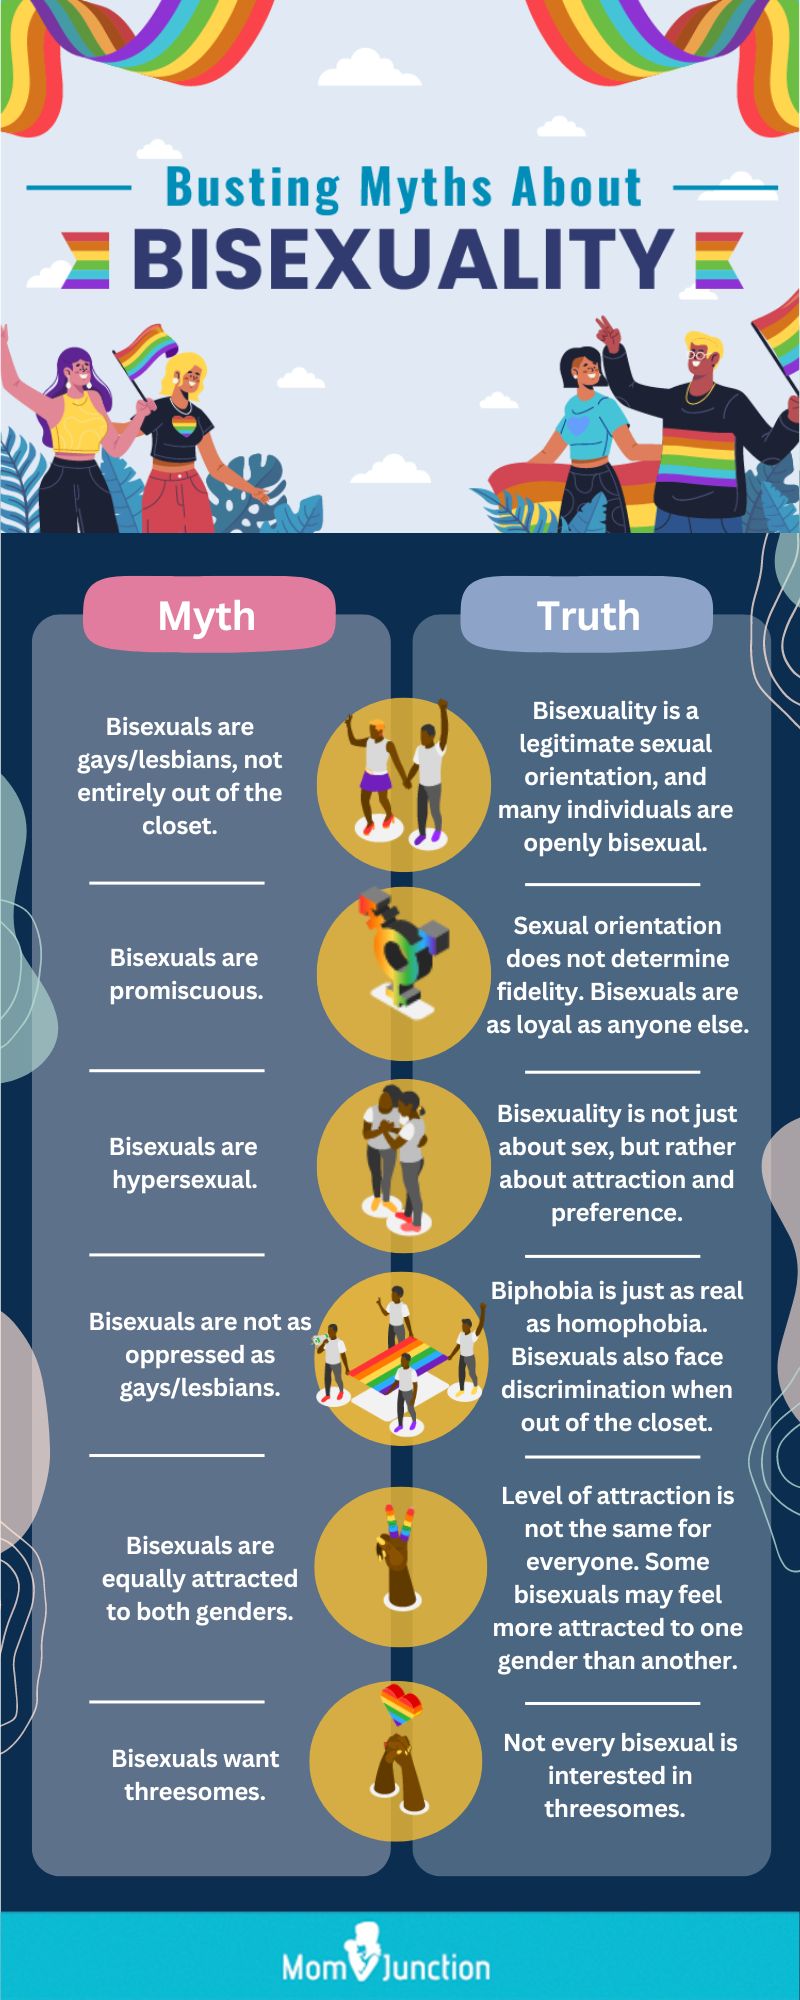 Am I Bisexual? 8 Signs To Know And Common Misconceptions